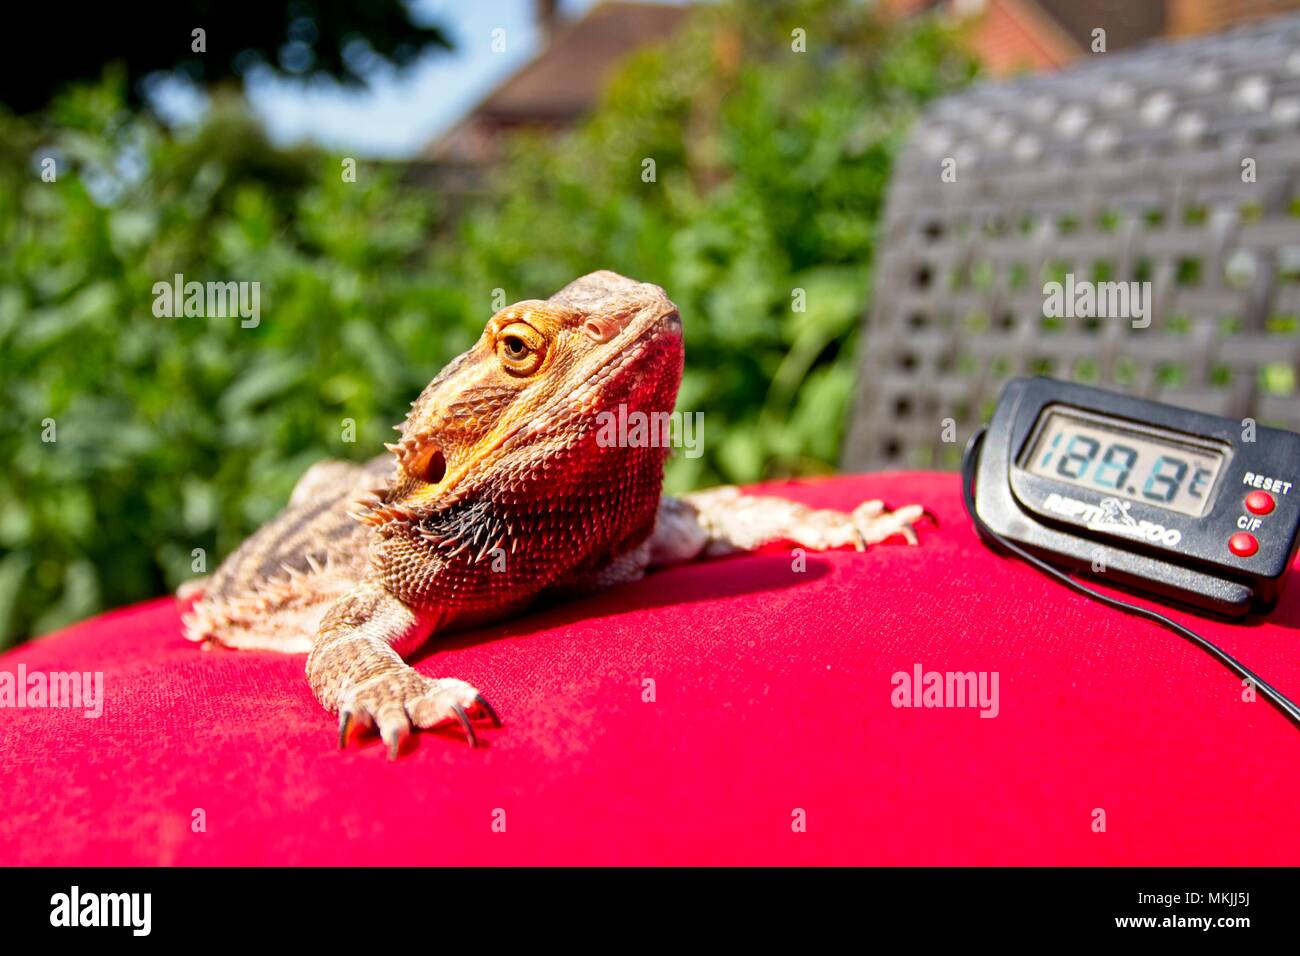 https://c8.alamy.com/comp/MKJJ5J/8th-may-2018-uk-weather-after-a-continuation-of-yesterdays-good-weather-fenster-the-bearded-dragon-enjoys-basking-during-this-sunny-spell-next-to-a-thermometer-reading-in-the-high-20s-east-sussexuk-credit-ed-brownalamy-live-news-MKJJ5J.jpg